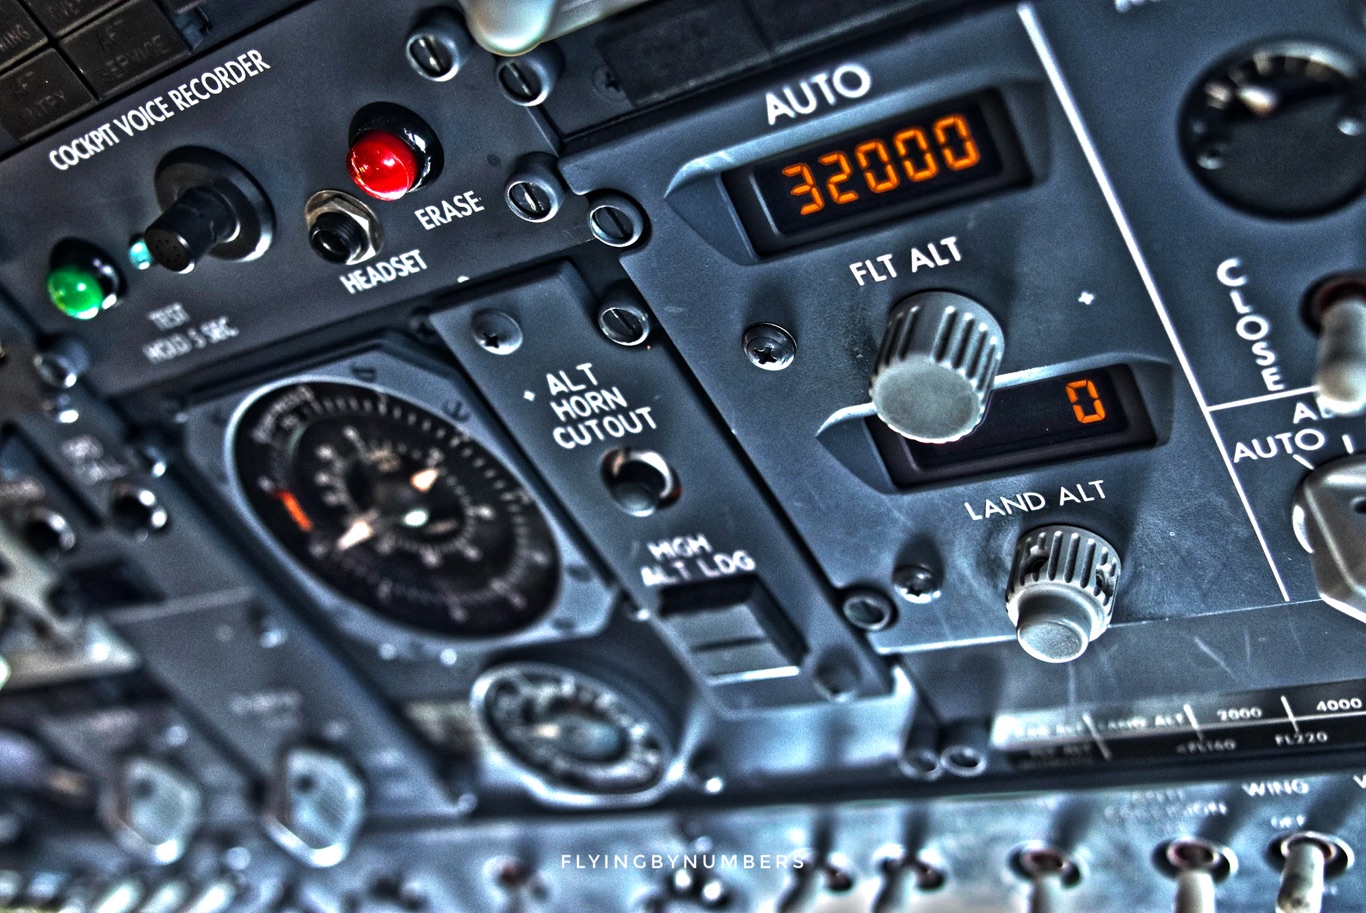 cabin pressure controller showing cruising altitude of 32,000 ft